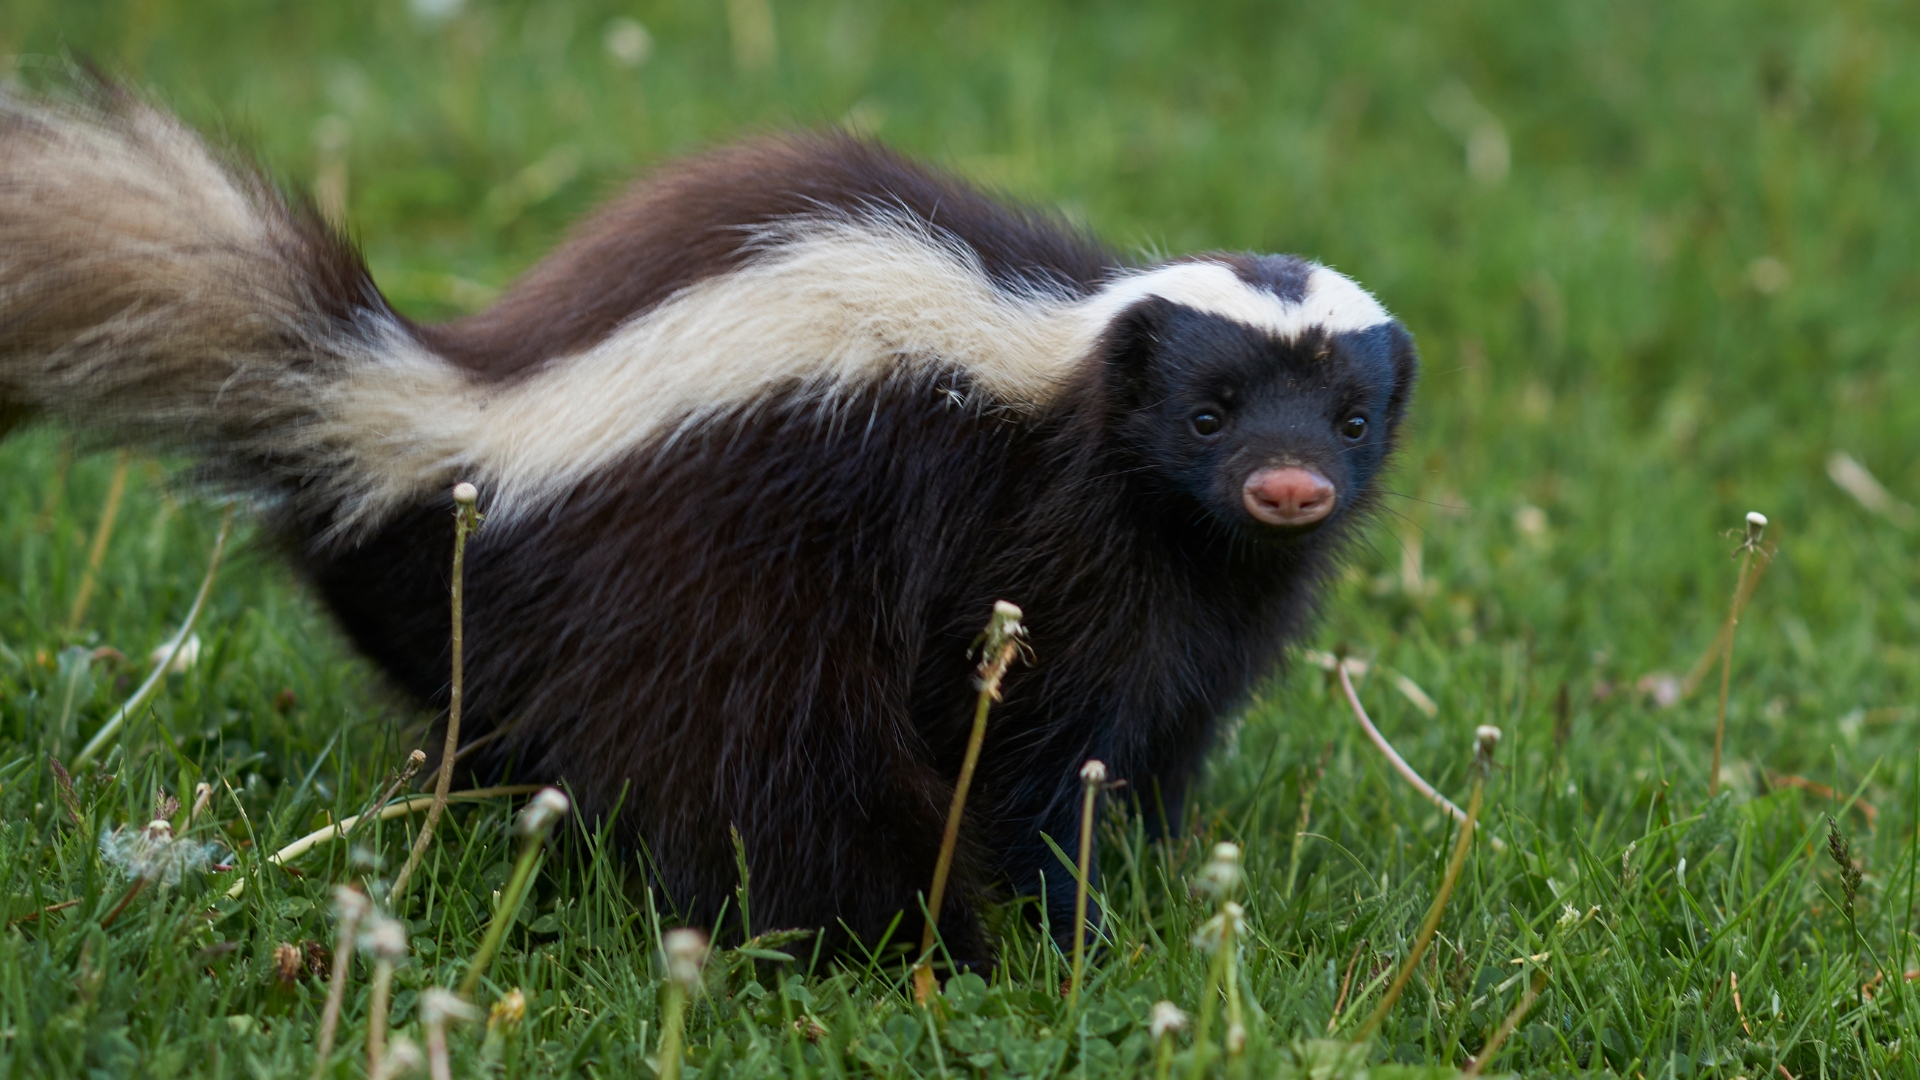 Use These 6 Brilliant Ways To Get Rid Of Skunks In Your Yard And Avoid Stinky Spray